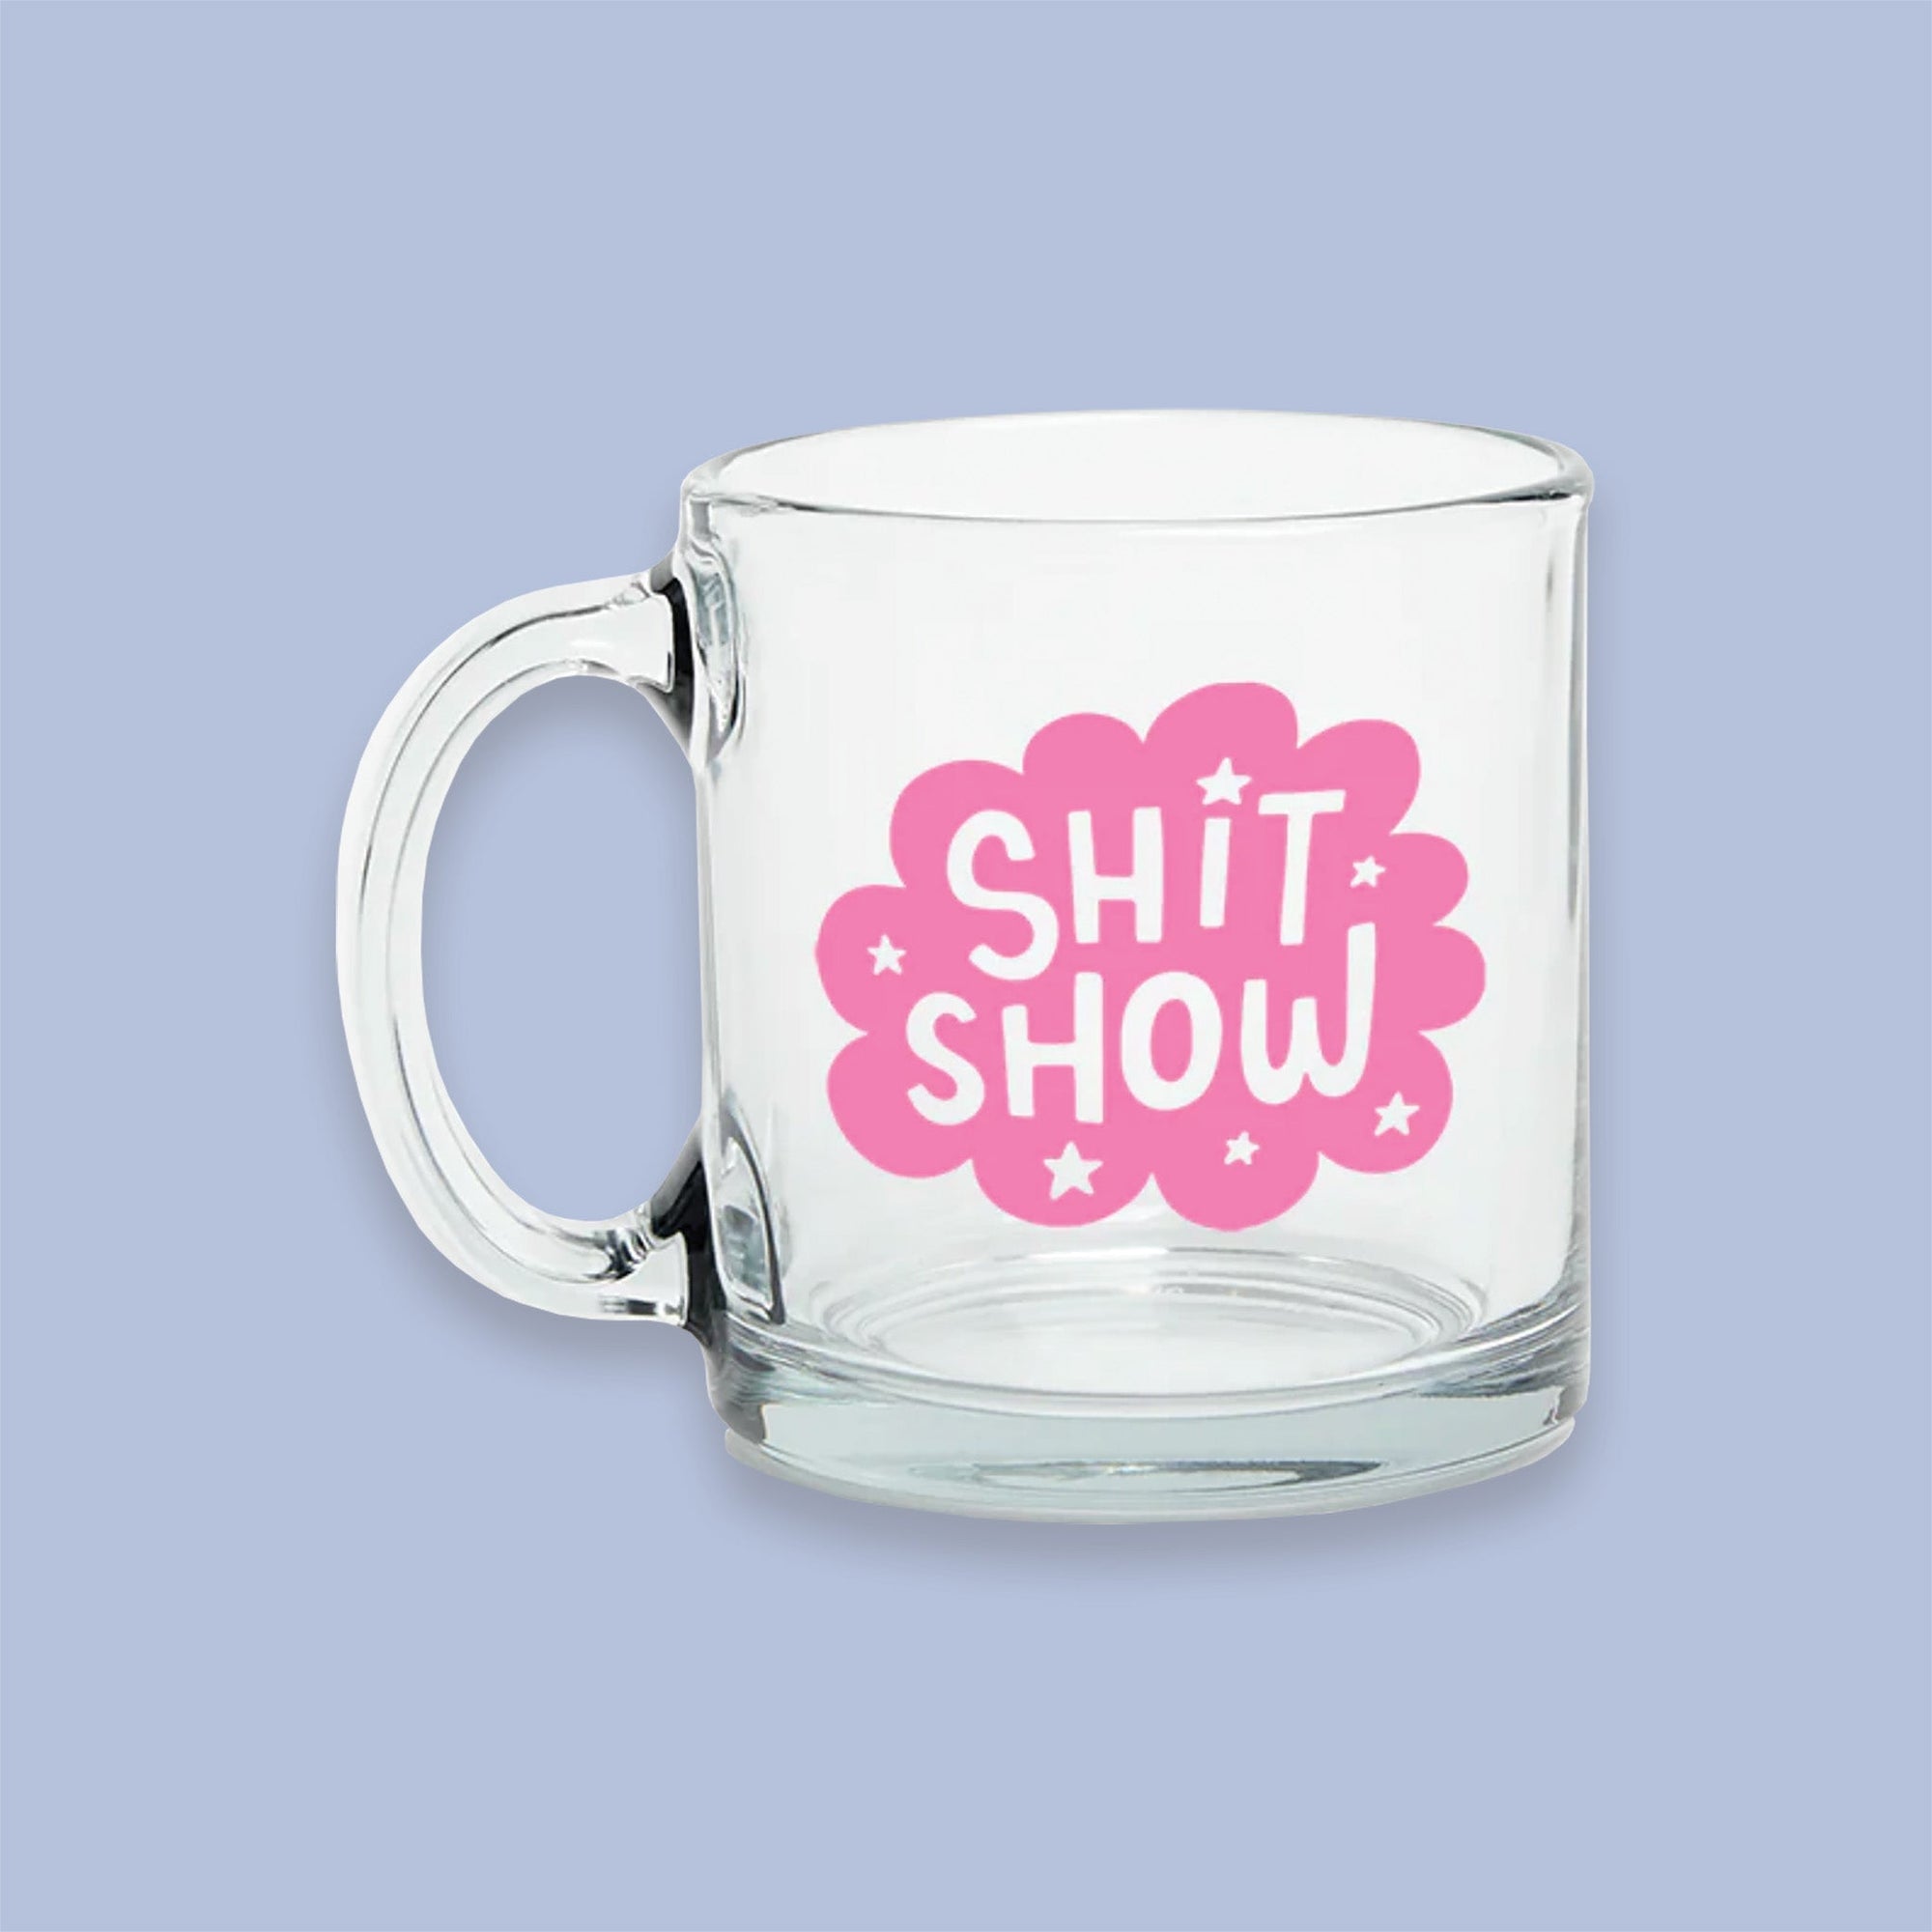 On a lavender background sits a mug. The clear glass mug has a bubblegum pink cloud on the front with white stars and it says "SHIT SHOW" in white, all caps handwritten lettering.